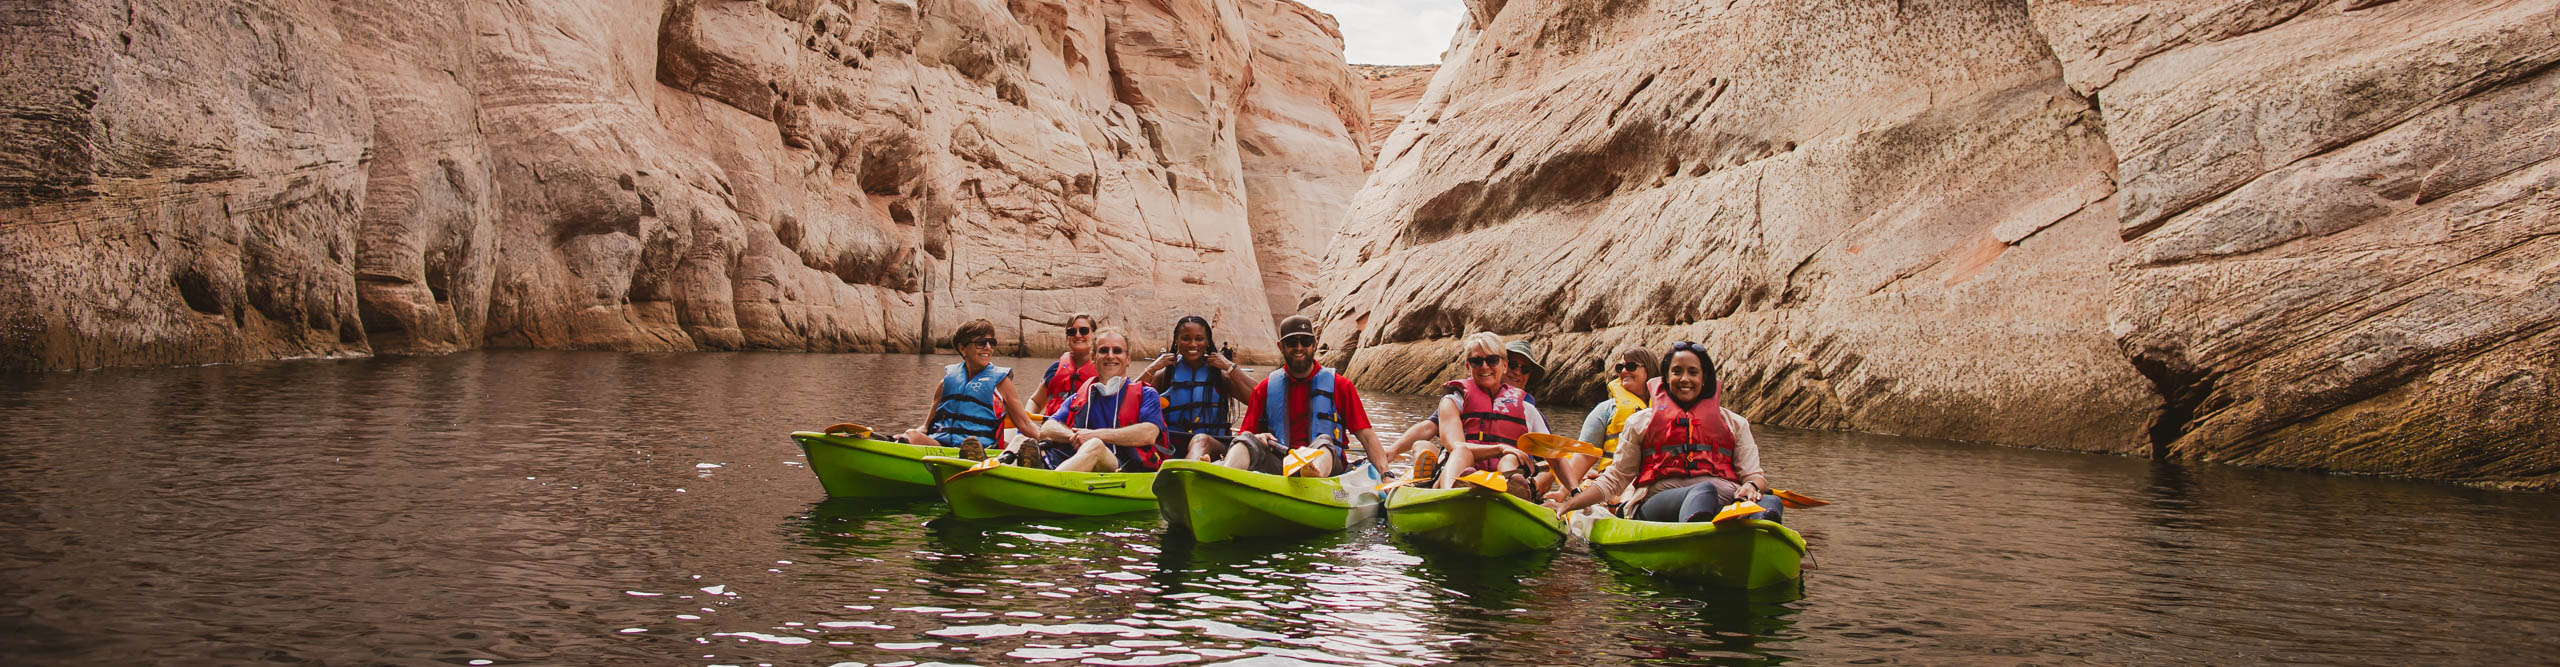 Group kayaking through the canyon on Lake Powell, on an overcast day, in Utah, USA